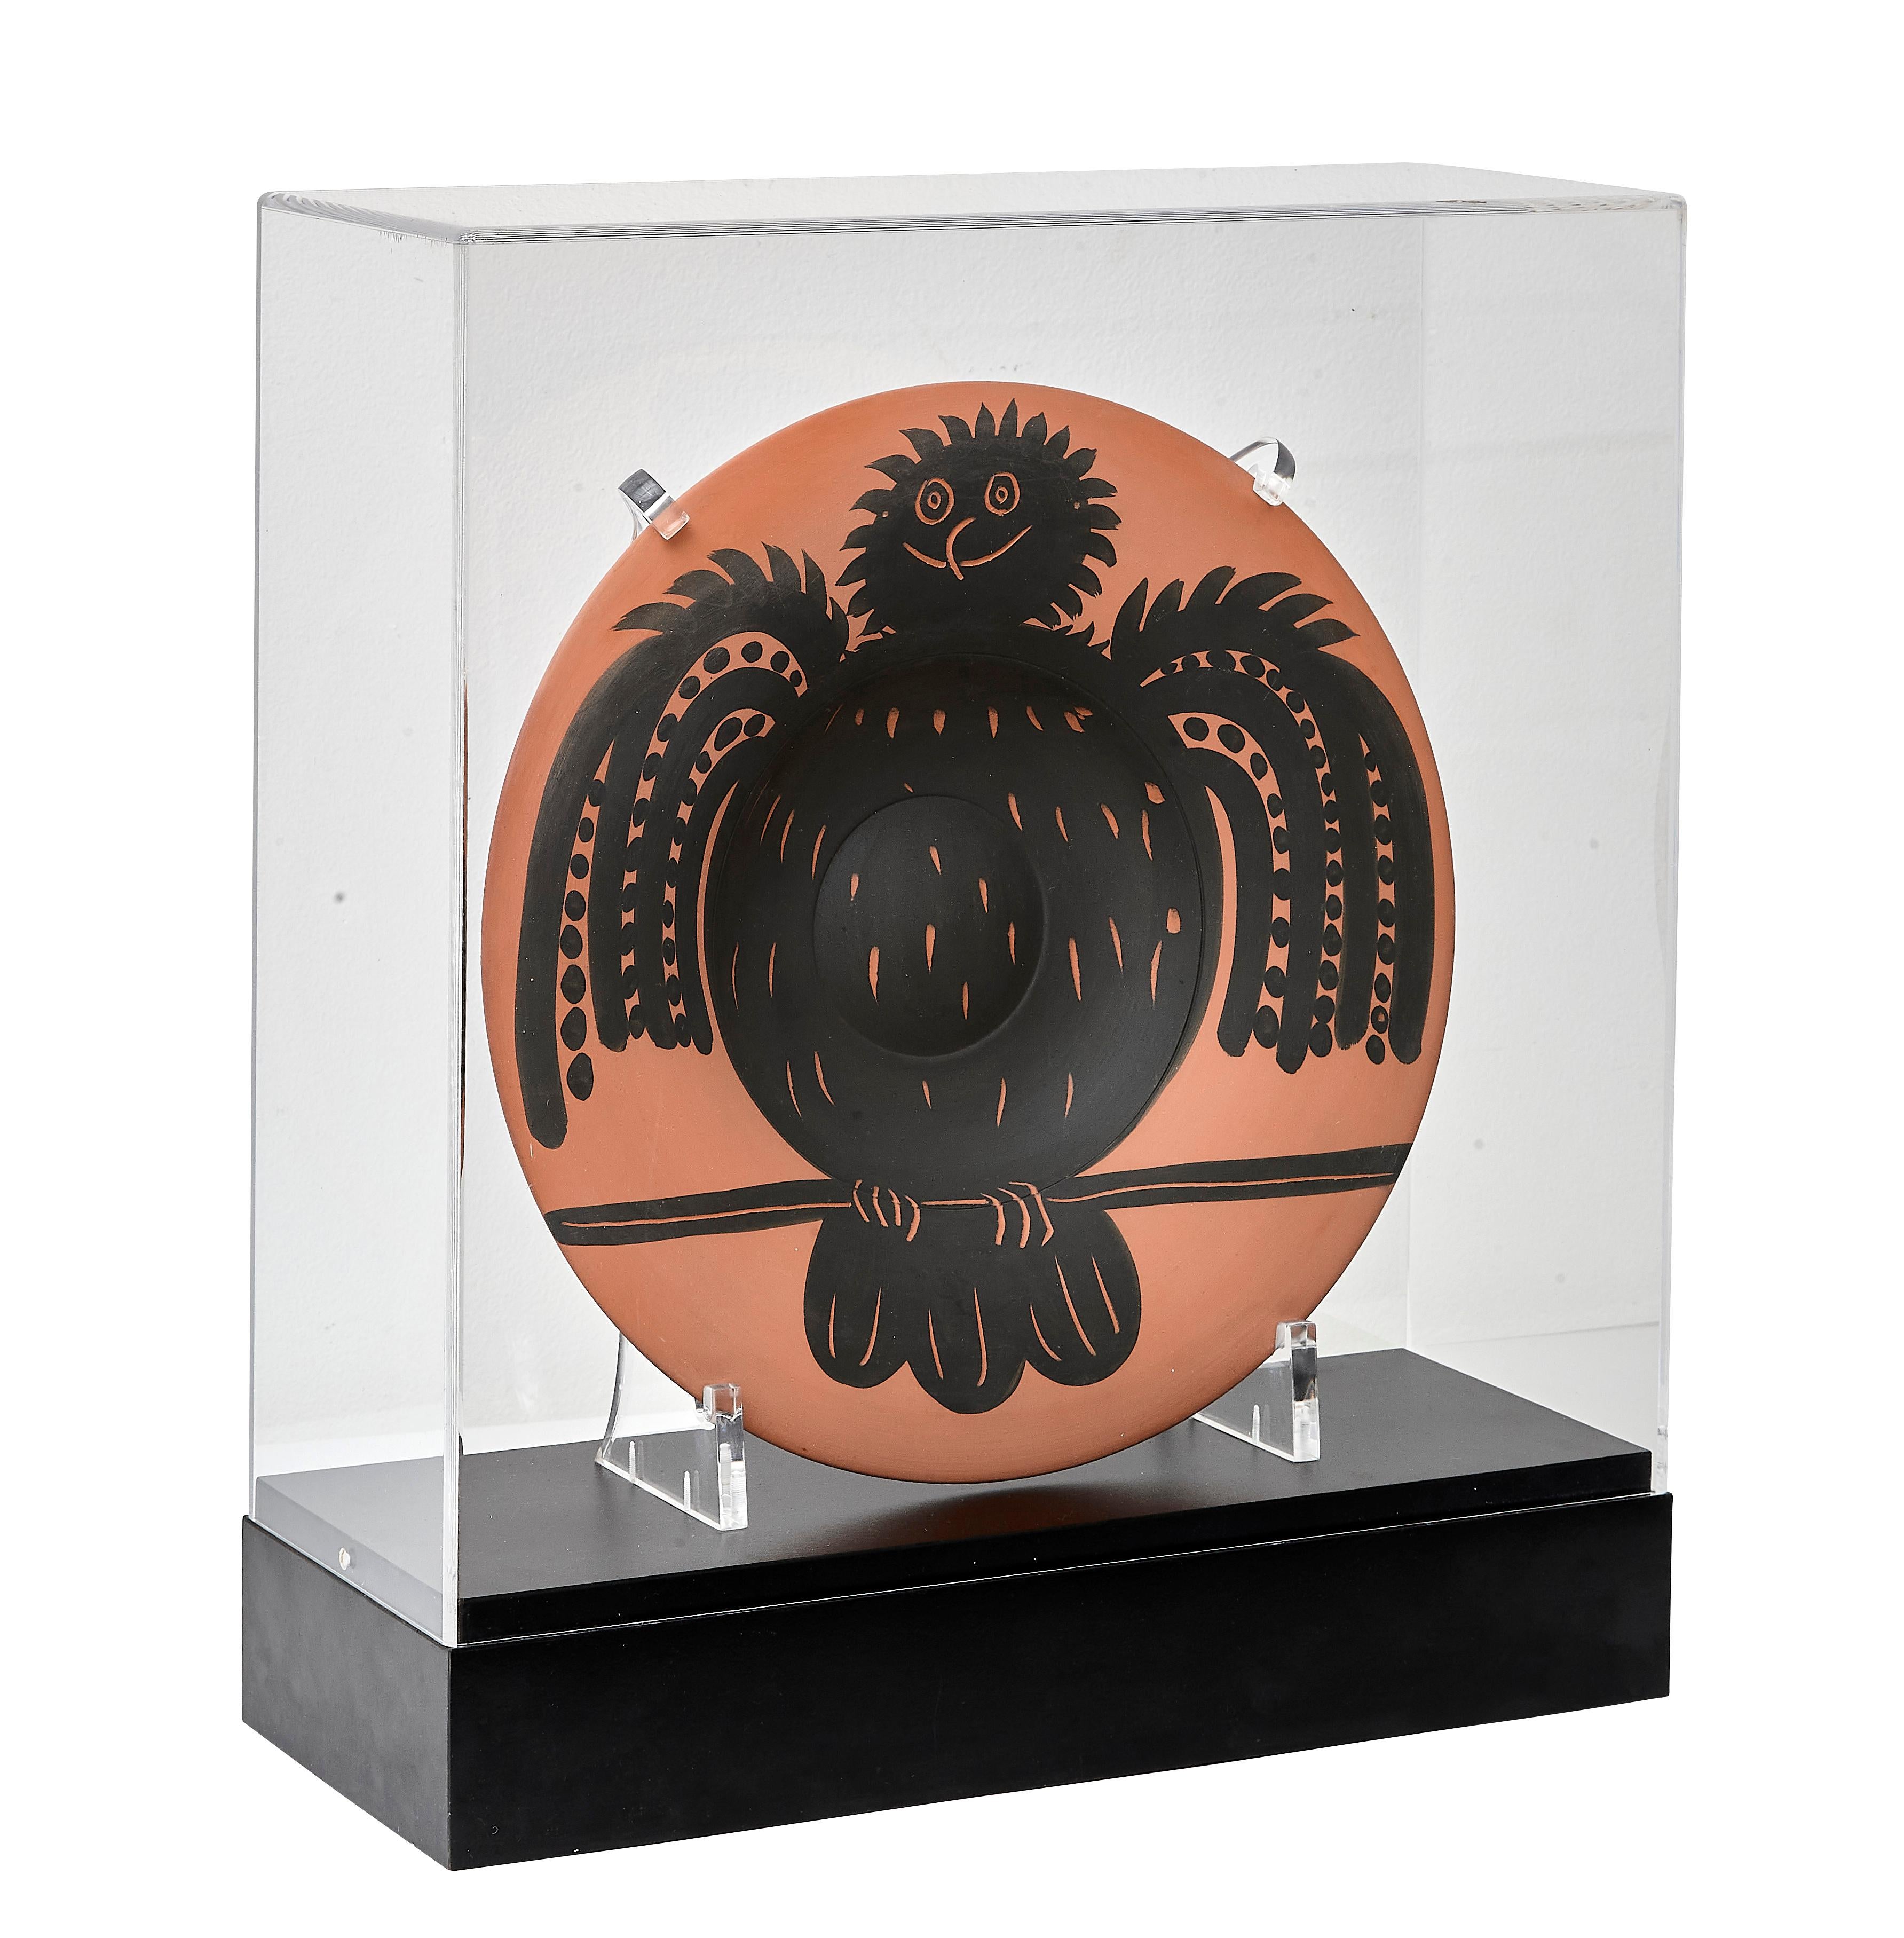 PABLO PICASSO (1881-1973) 
Hibou noir perche (A. R. 398) 

Terre de faïence dish, painted, 1957, numbered 33/100 and incised 'N 104', with the Edition Picasso and Madoura stamps.